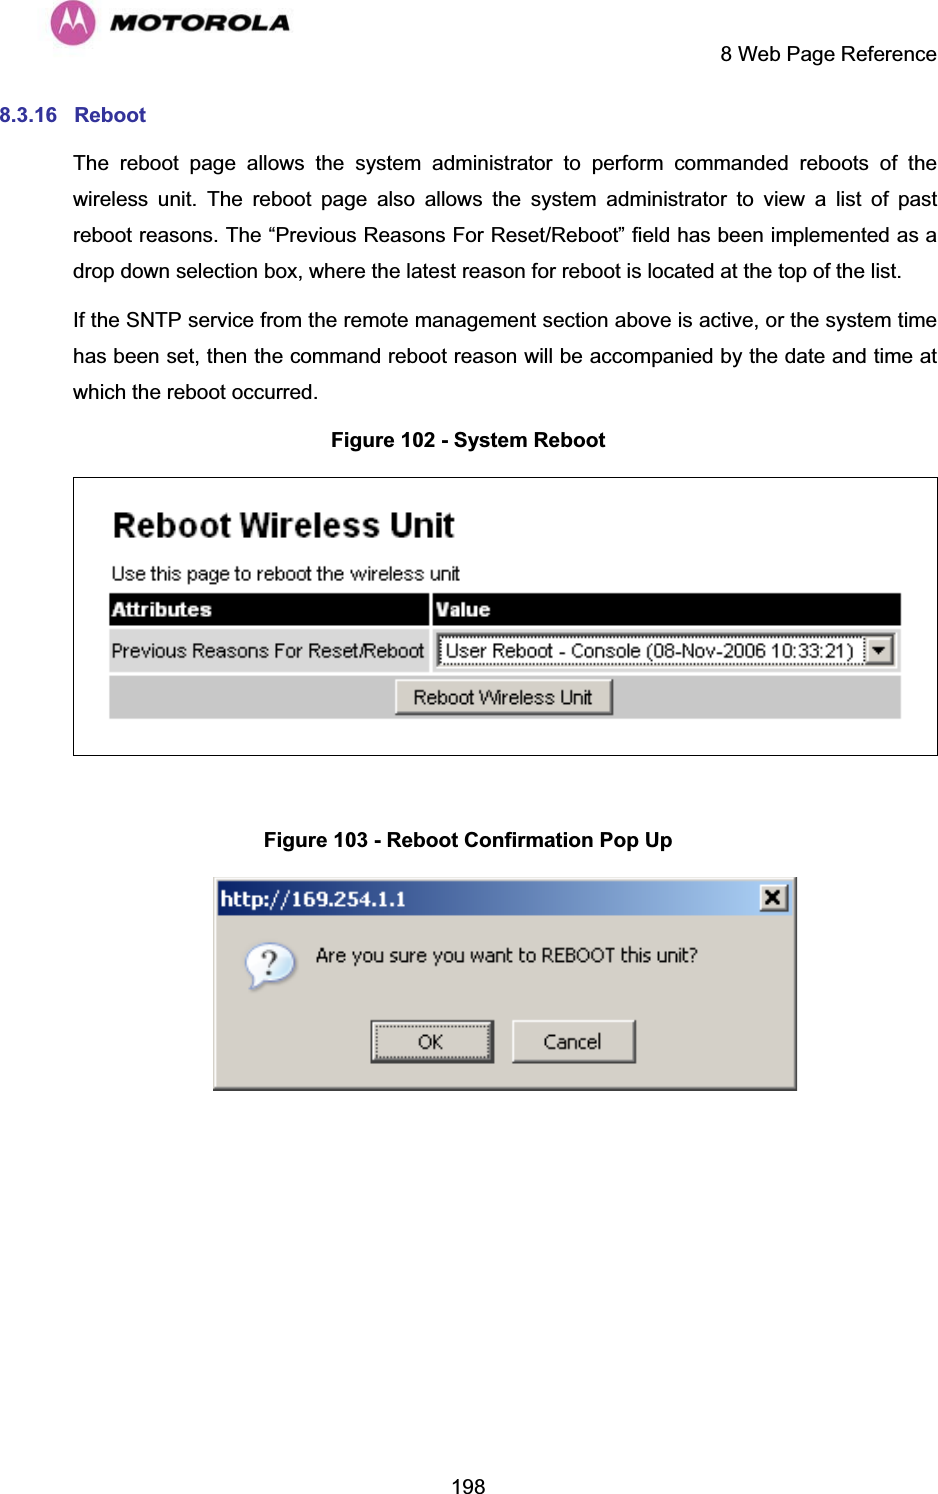     8 Web Page Reference  1988.3.16 Reboot  The reboot page allows the system administrator to perform commanded reboots of the wireless unit. The reboot page also allows the system administrator to view a list of past reboot reasons. The “Previous Reasons For Reset/Reboot” field has been implemented as a drop down selection box, where the latest reason for reboot is located at the top of the list. If the SNTP service from the remote management section above is active, or the system time has been set, then the command reboot reason will be accompanied by the date and time at which the reboot occurred. Figure 102 - System Reboot   Figure 103 - Reboot Confirmation Pop Up   